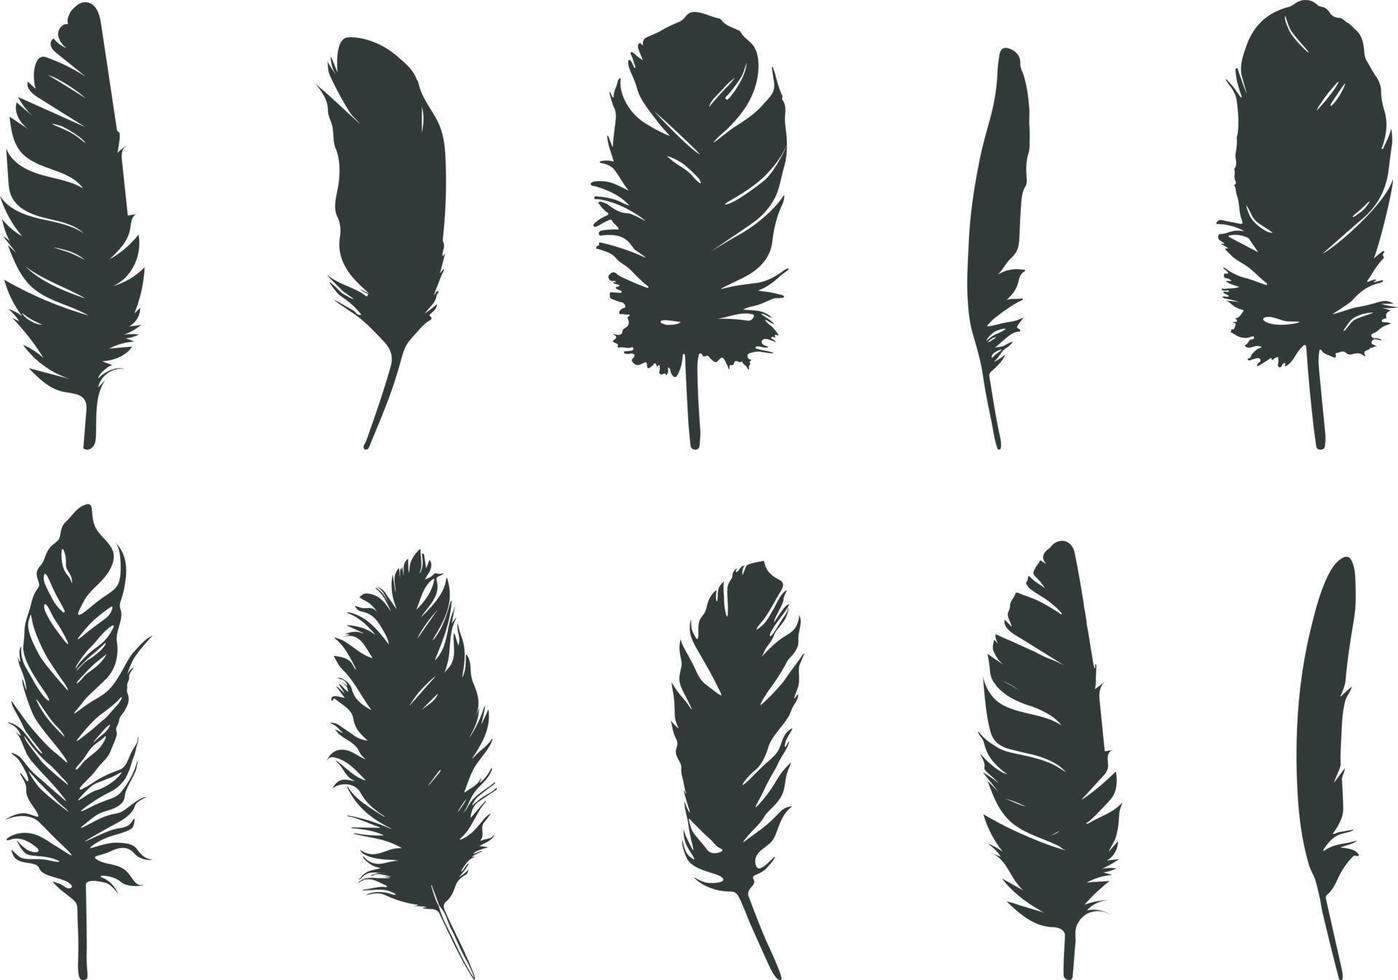 Feather silhouette, Feather of birds silhouette, Feather vector icon